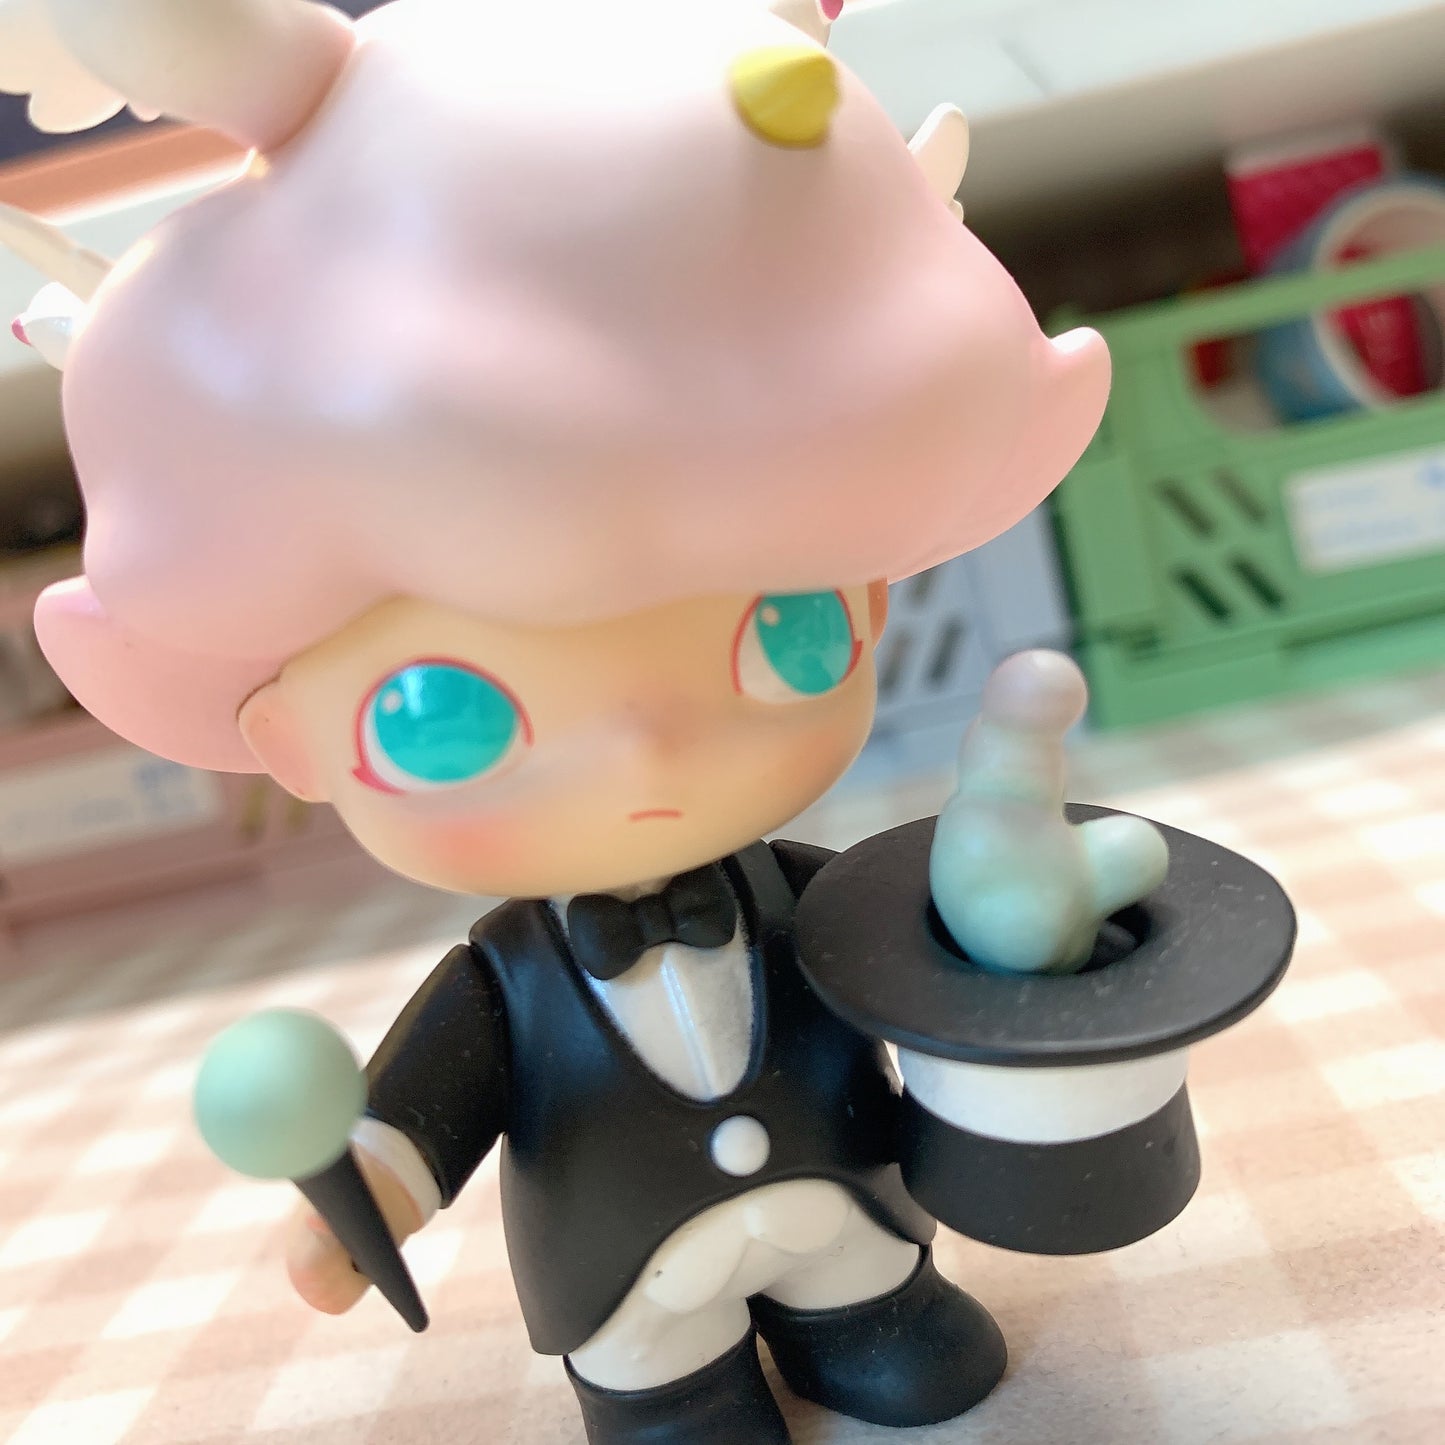 【PRELOVED and SALE 】POPMART Dimoo blind box toy Magician